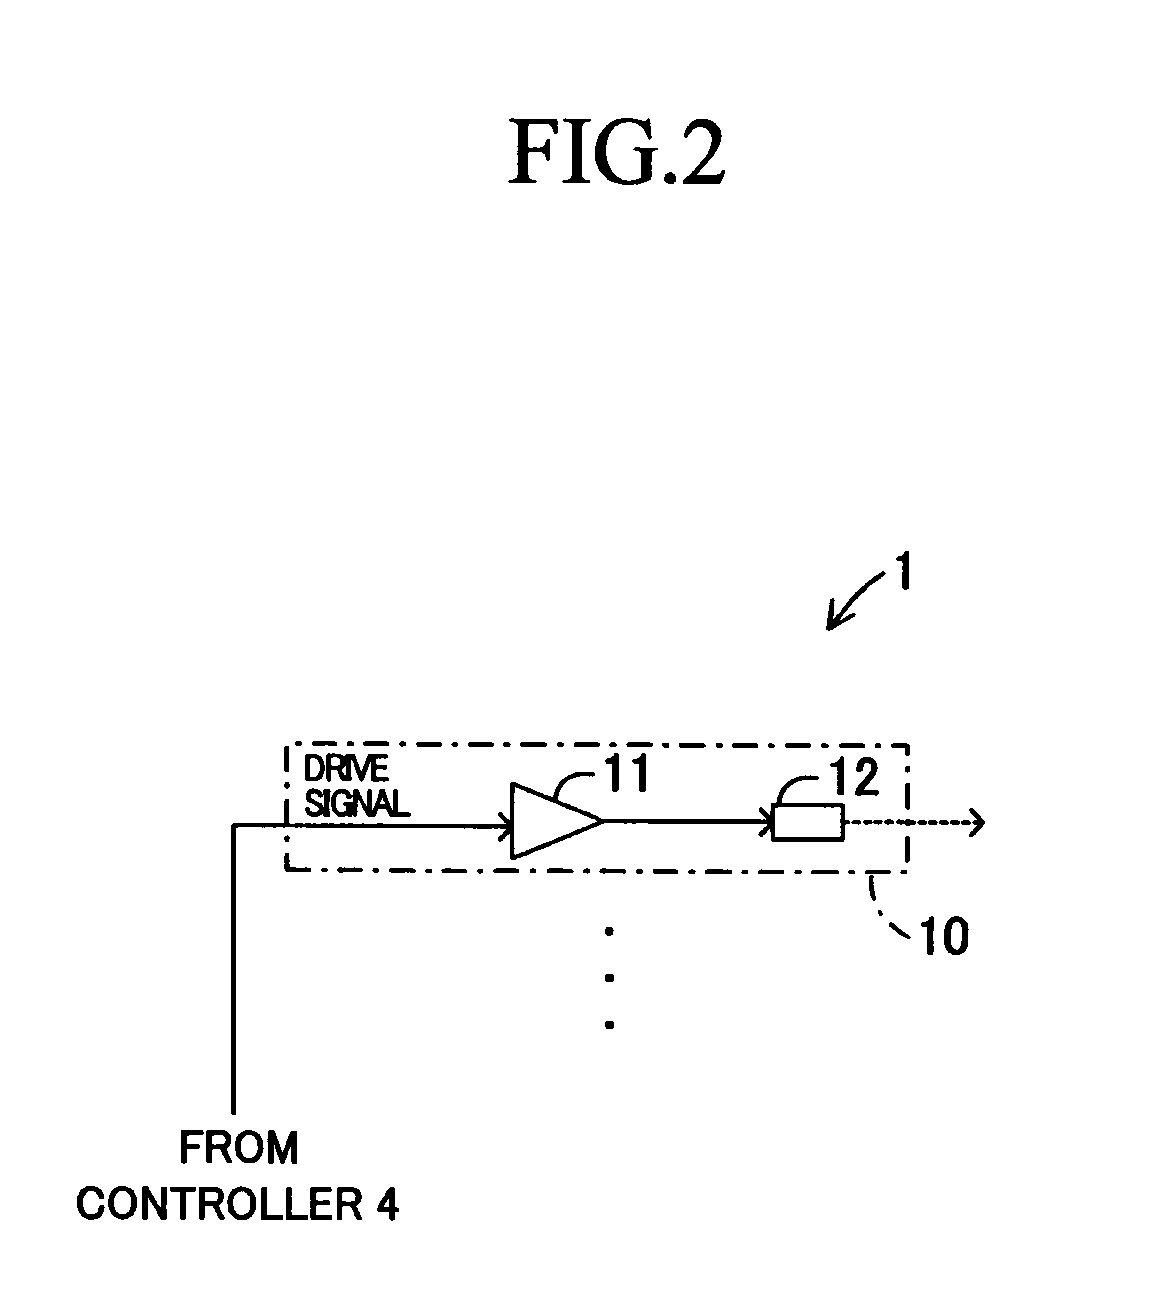 Optical interference apparatus